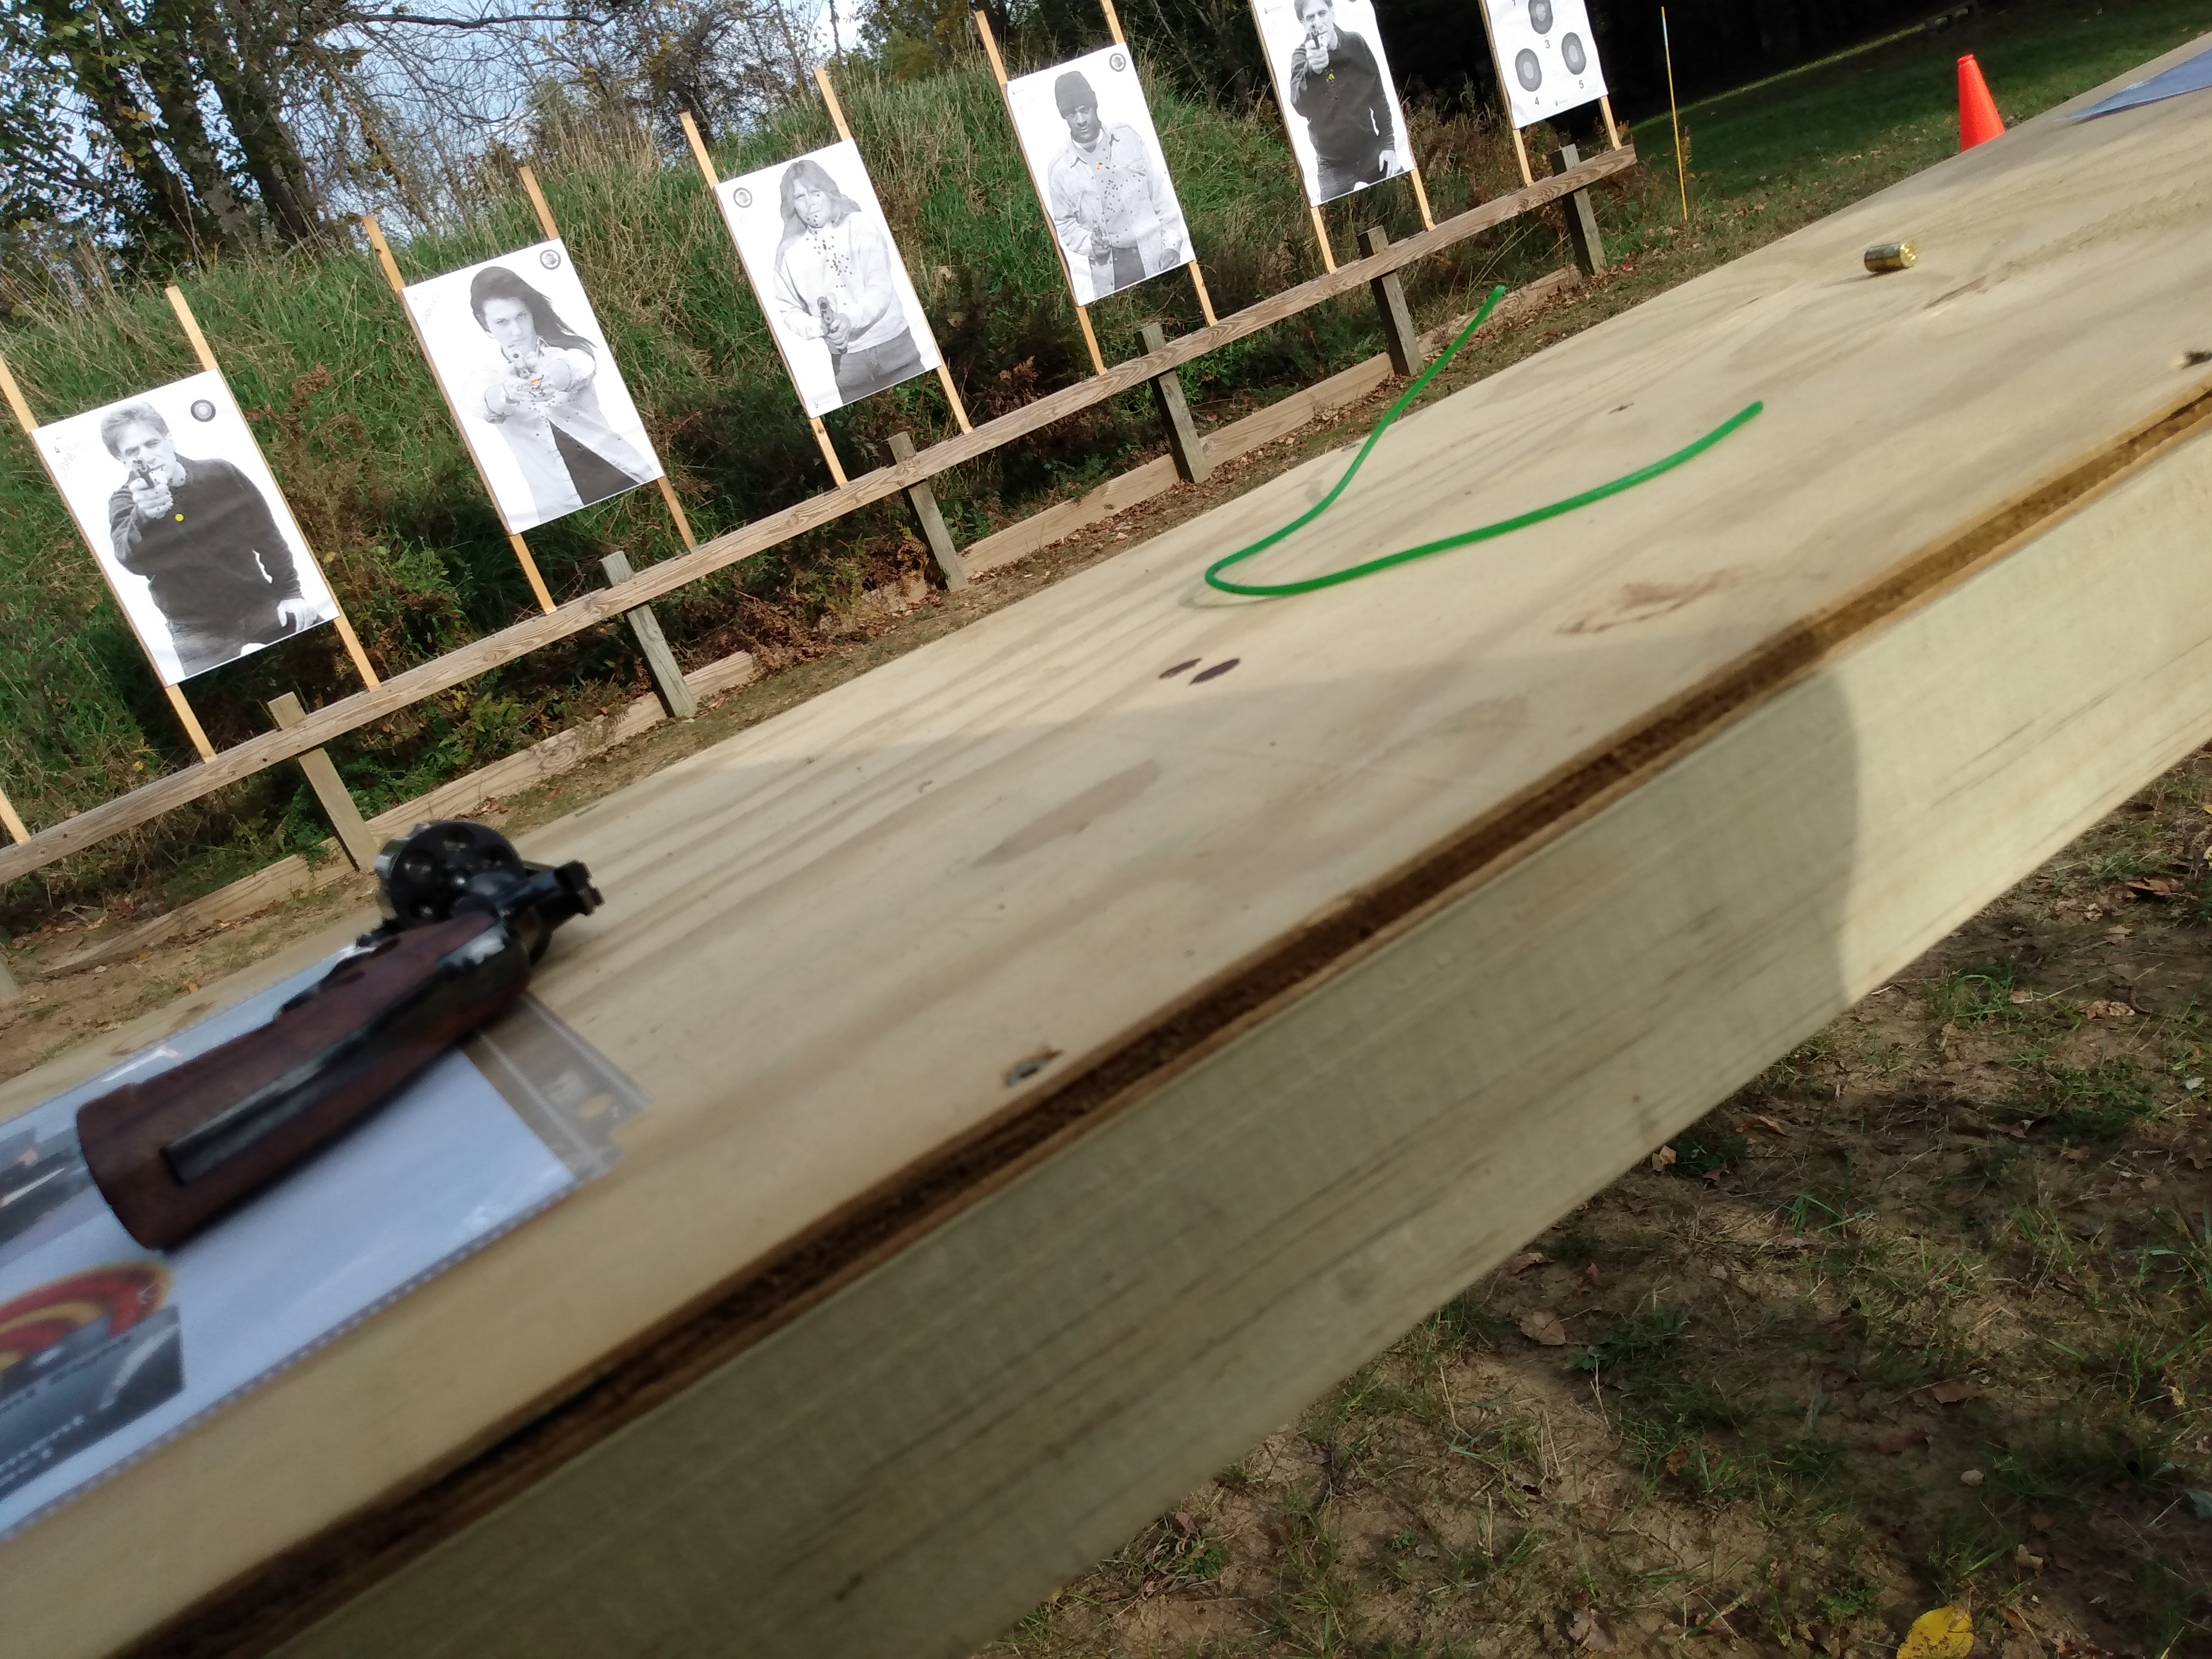 Target downrange of unloaded revolver and instructional reference material on range table